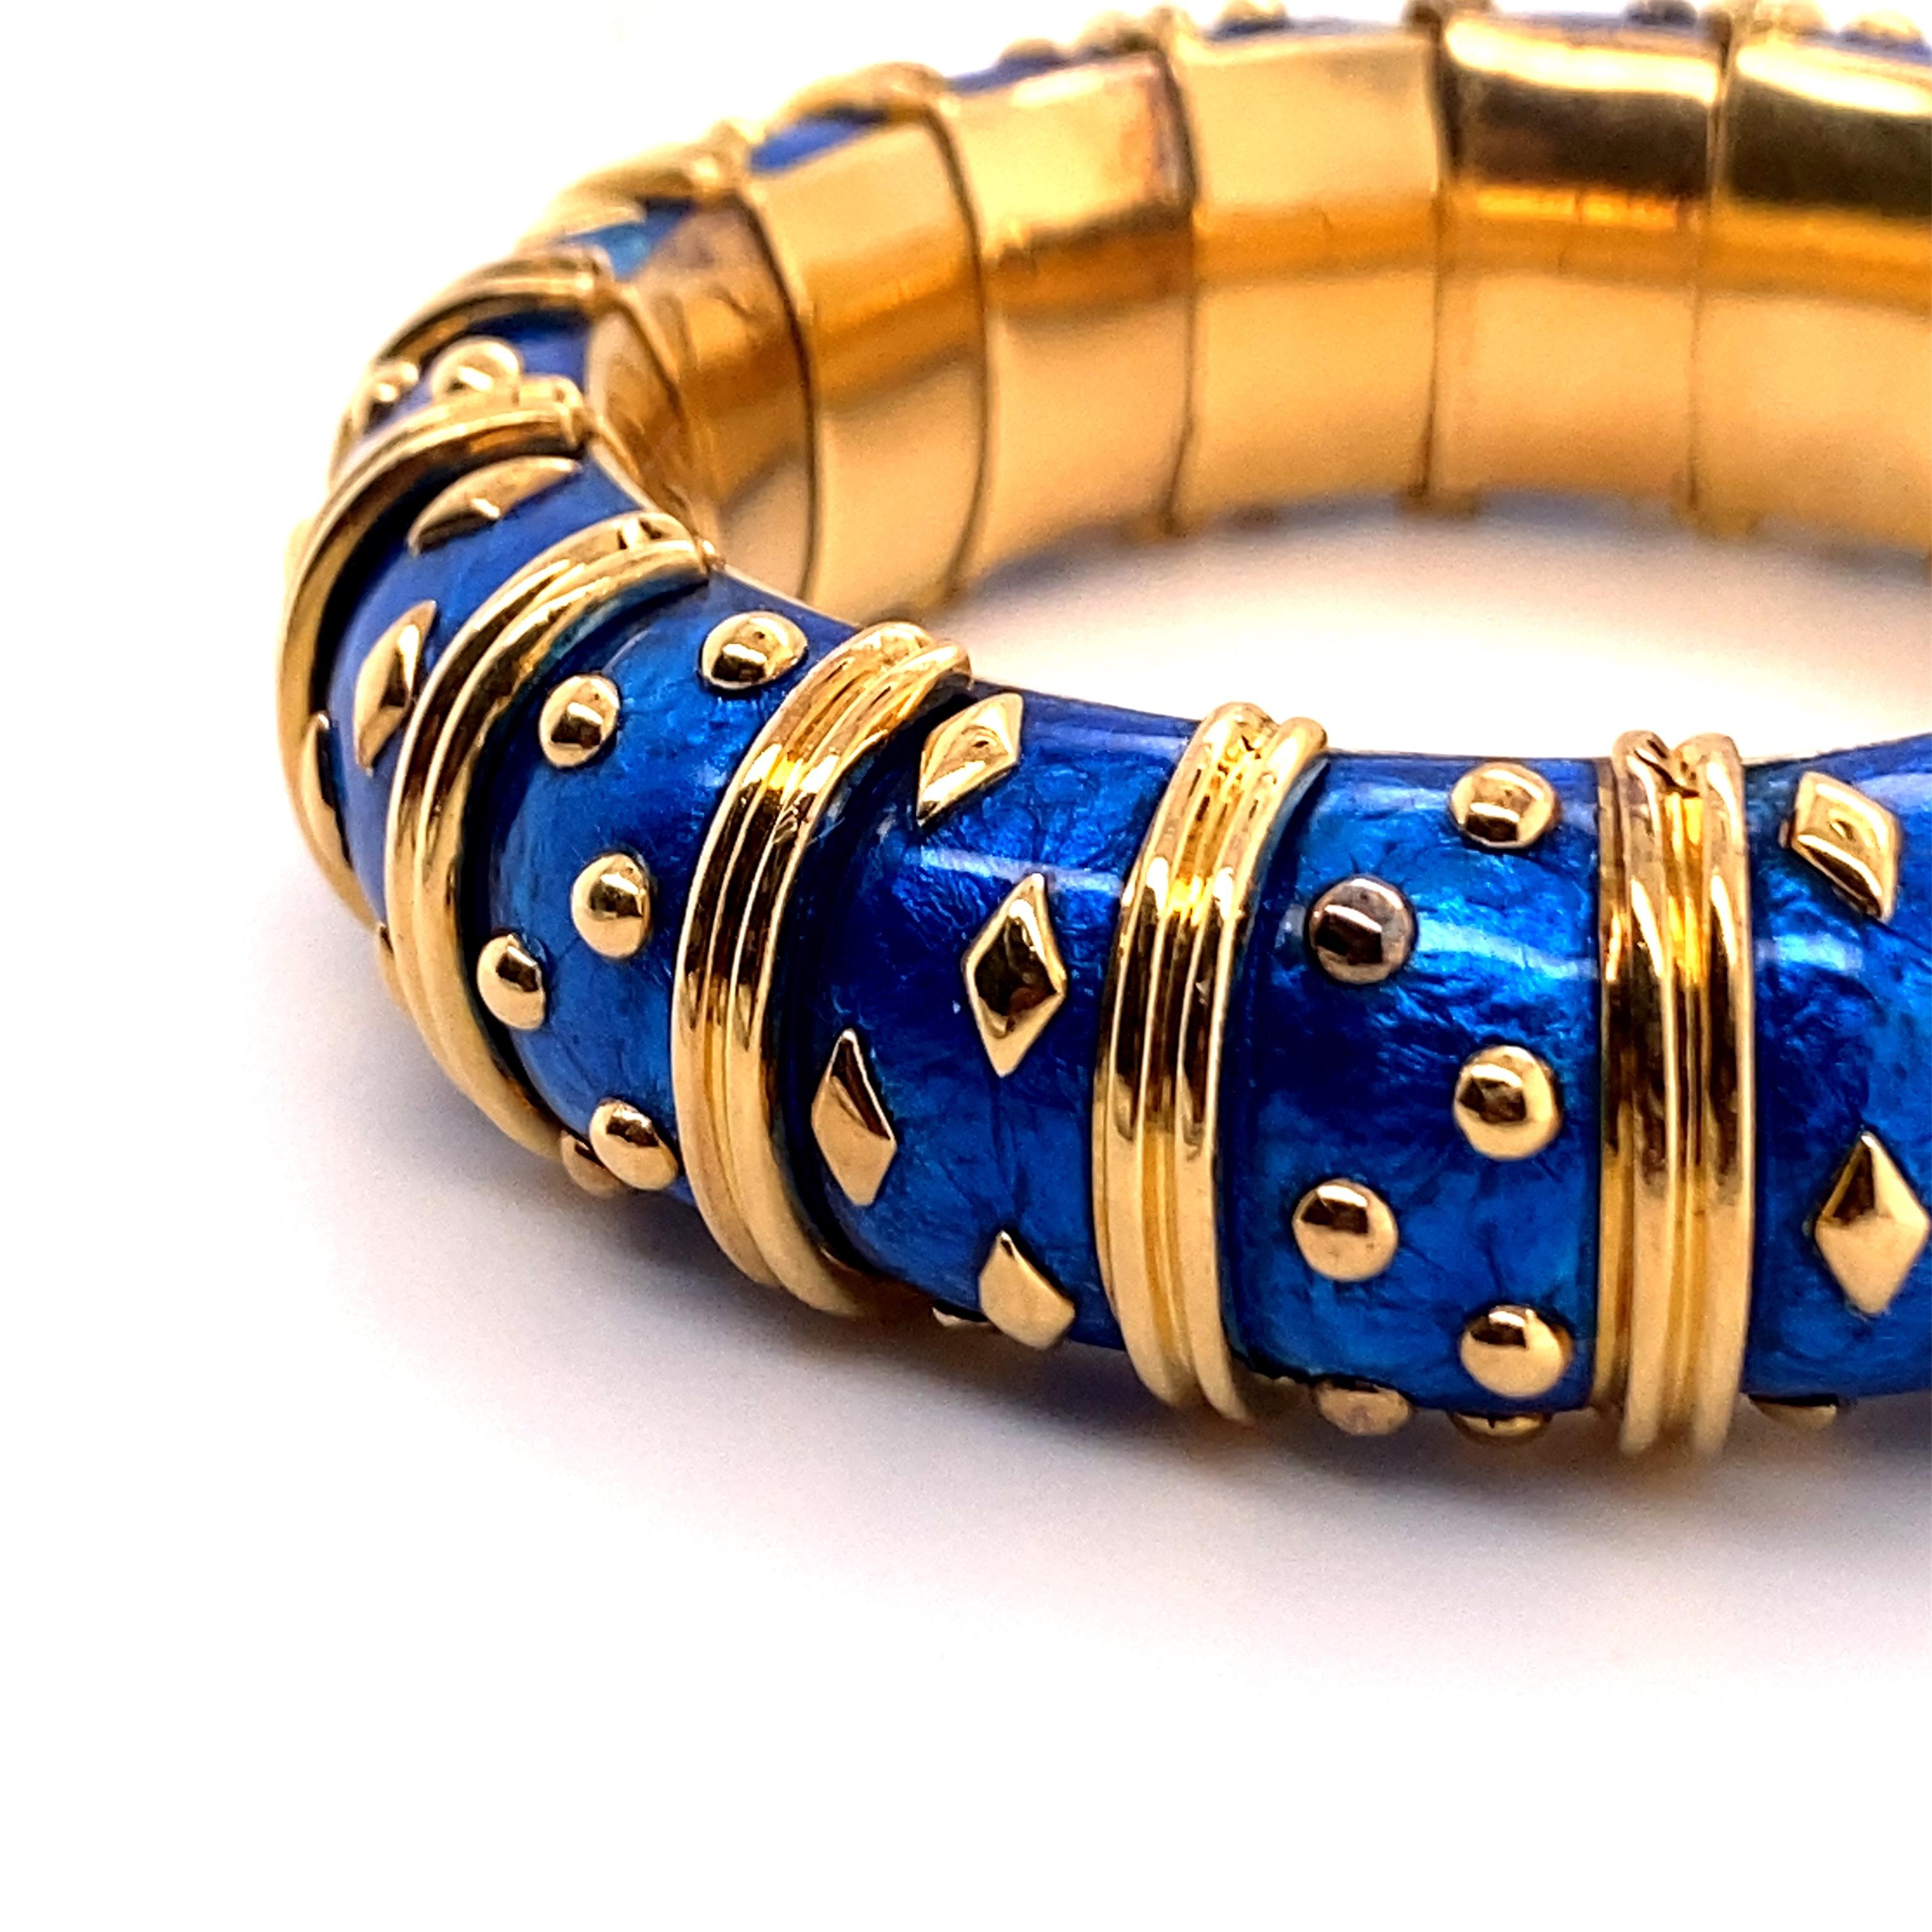 The bracelet is created using a 19th century enameling technique referred to as paillonné, alternately-set with polished gold circular and navette-shaped accents, enhanced by gold ribbed spacers, mounted in 18k yellow gold. Jean Schlumberger